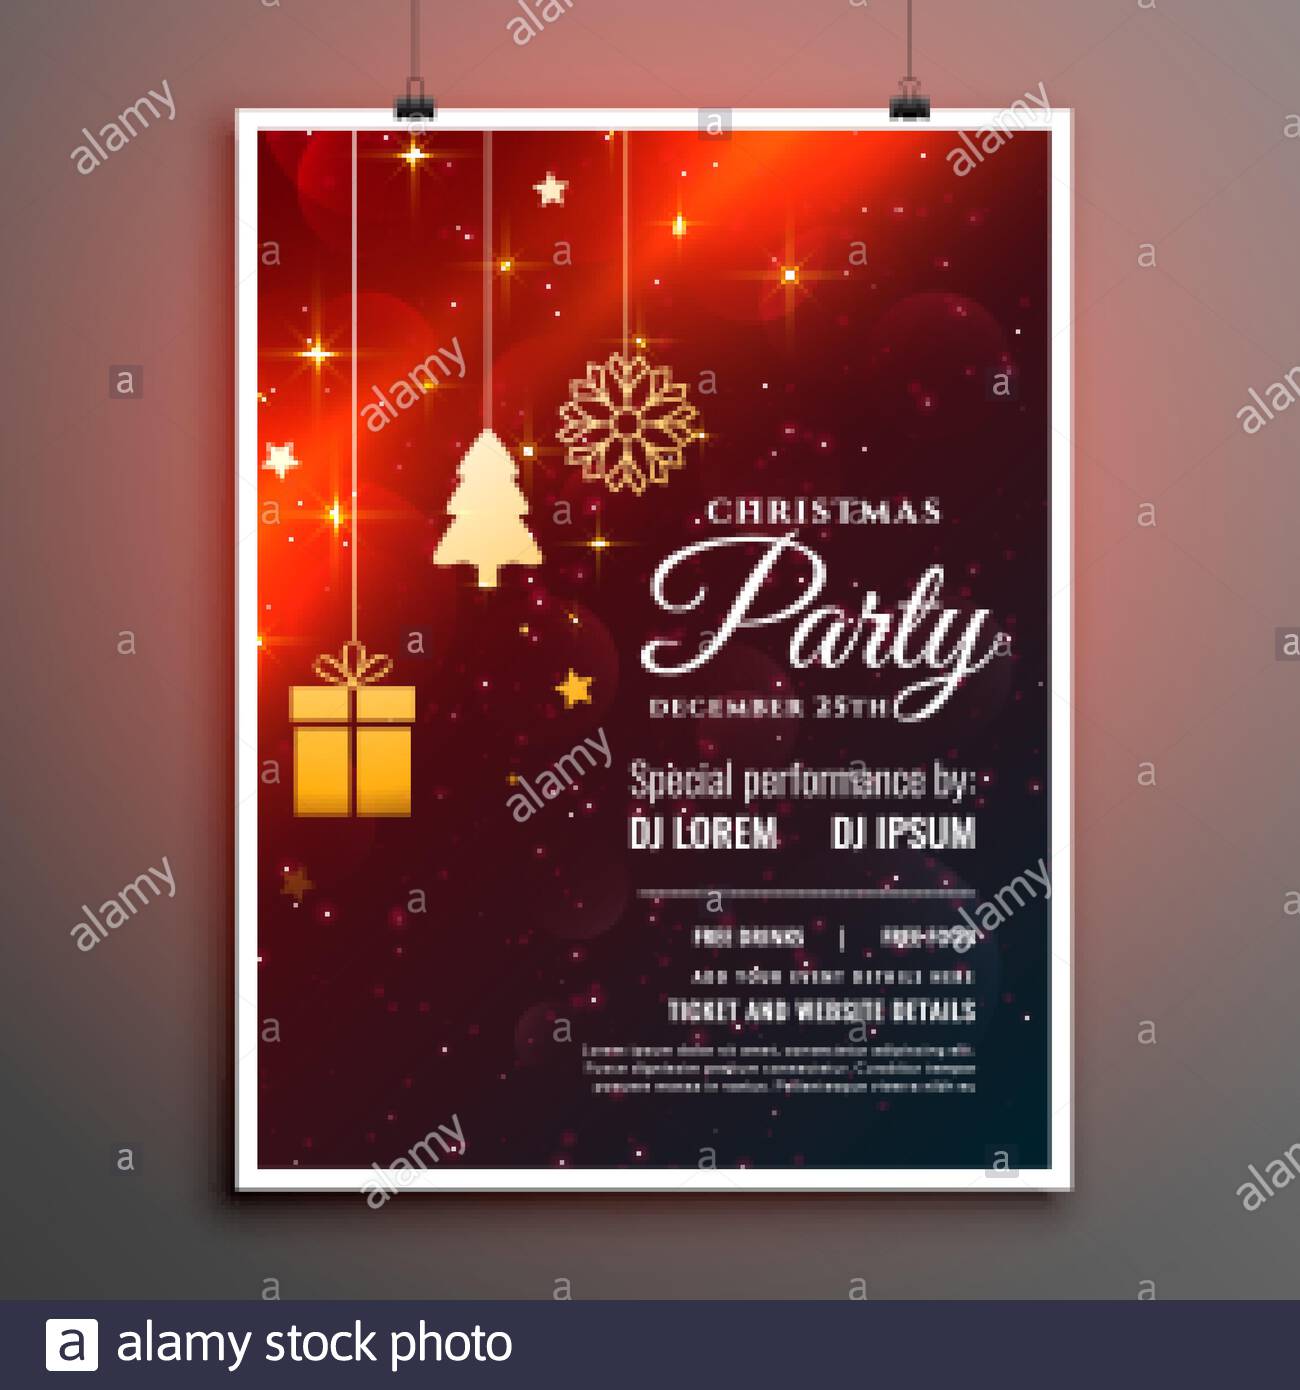 Christmas Party Flyers Template from c8.alamy.com